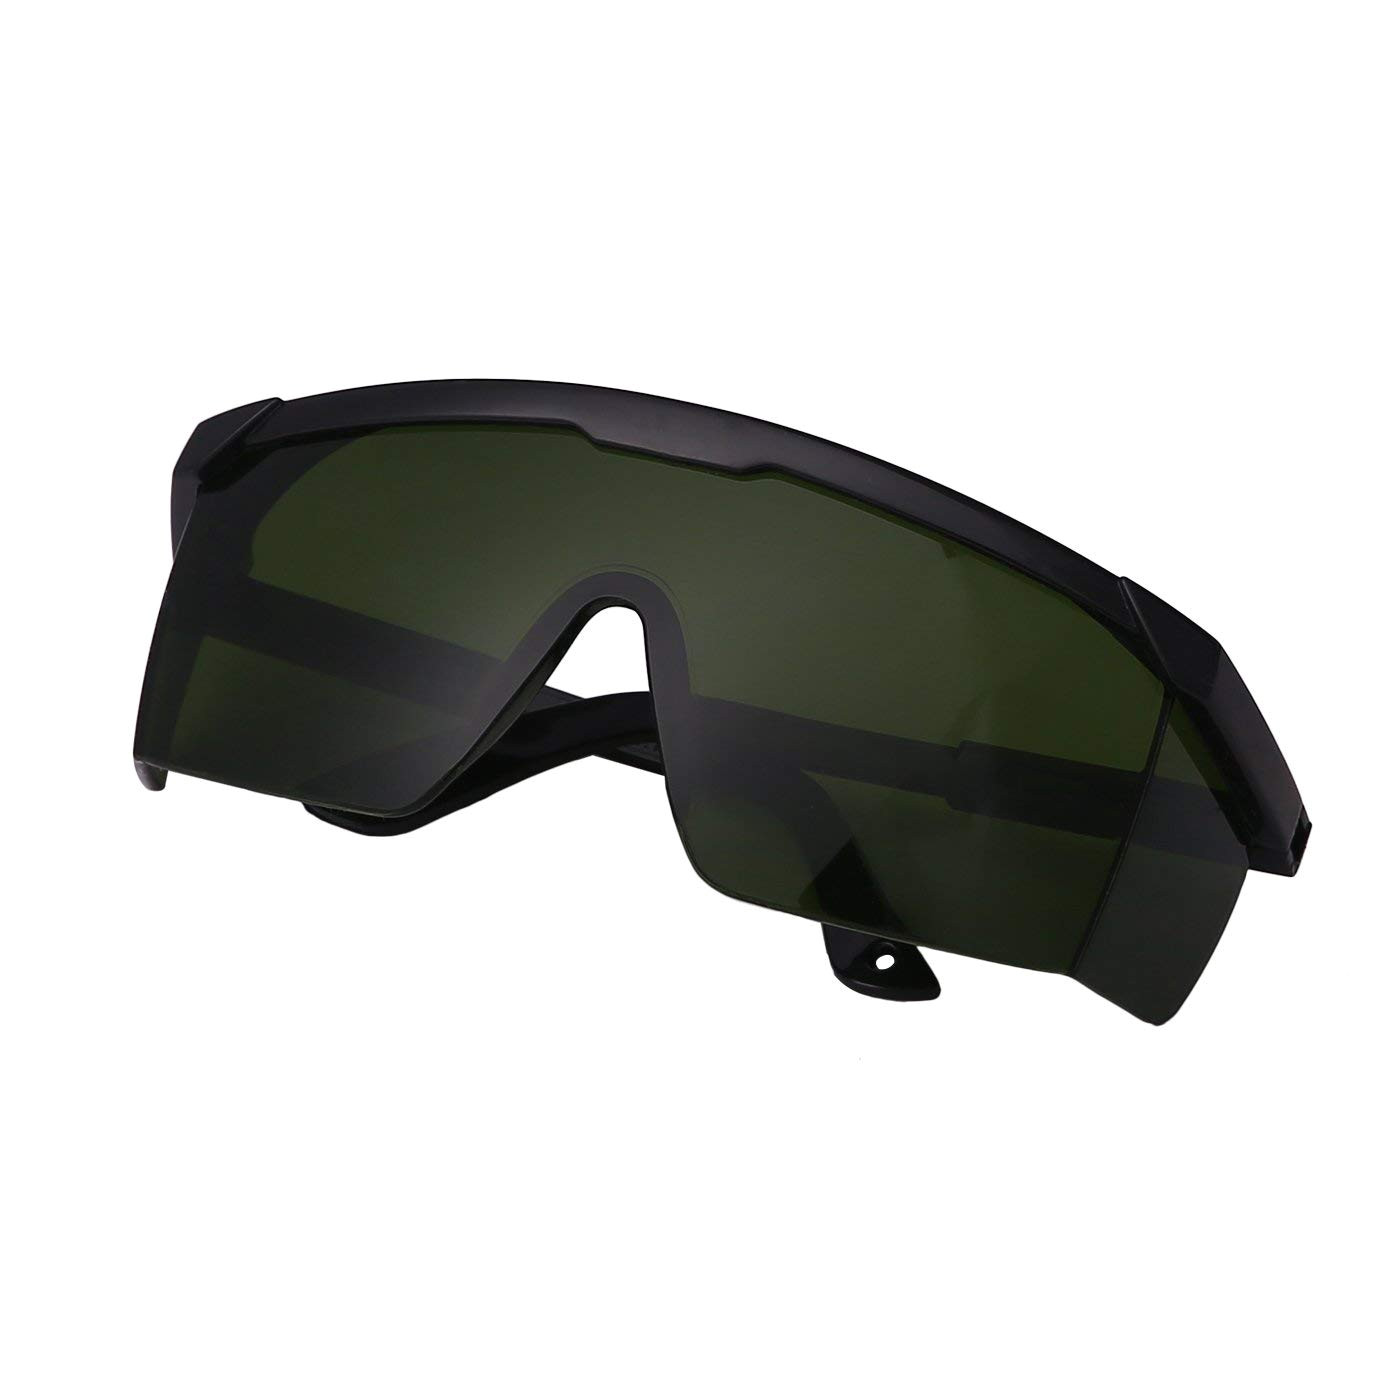 hde laser eye protection safety glasses for green and blue lasers with case green amazon ca sports outdoors